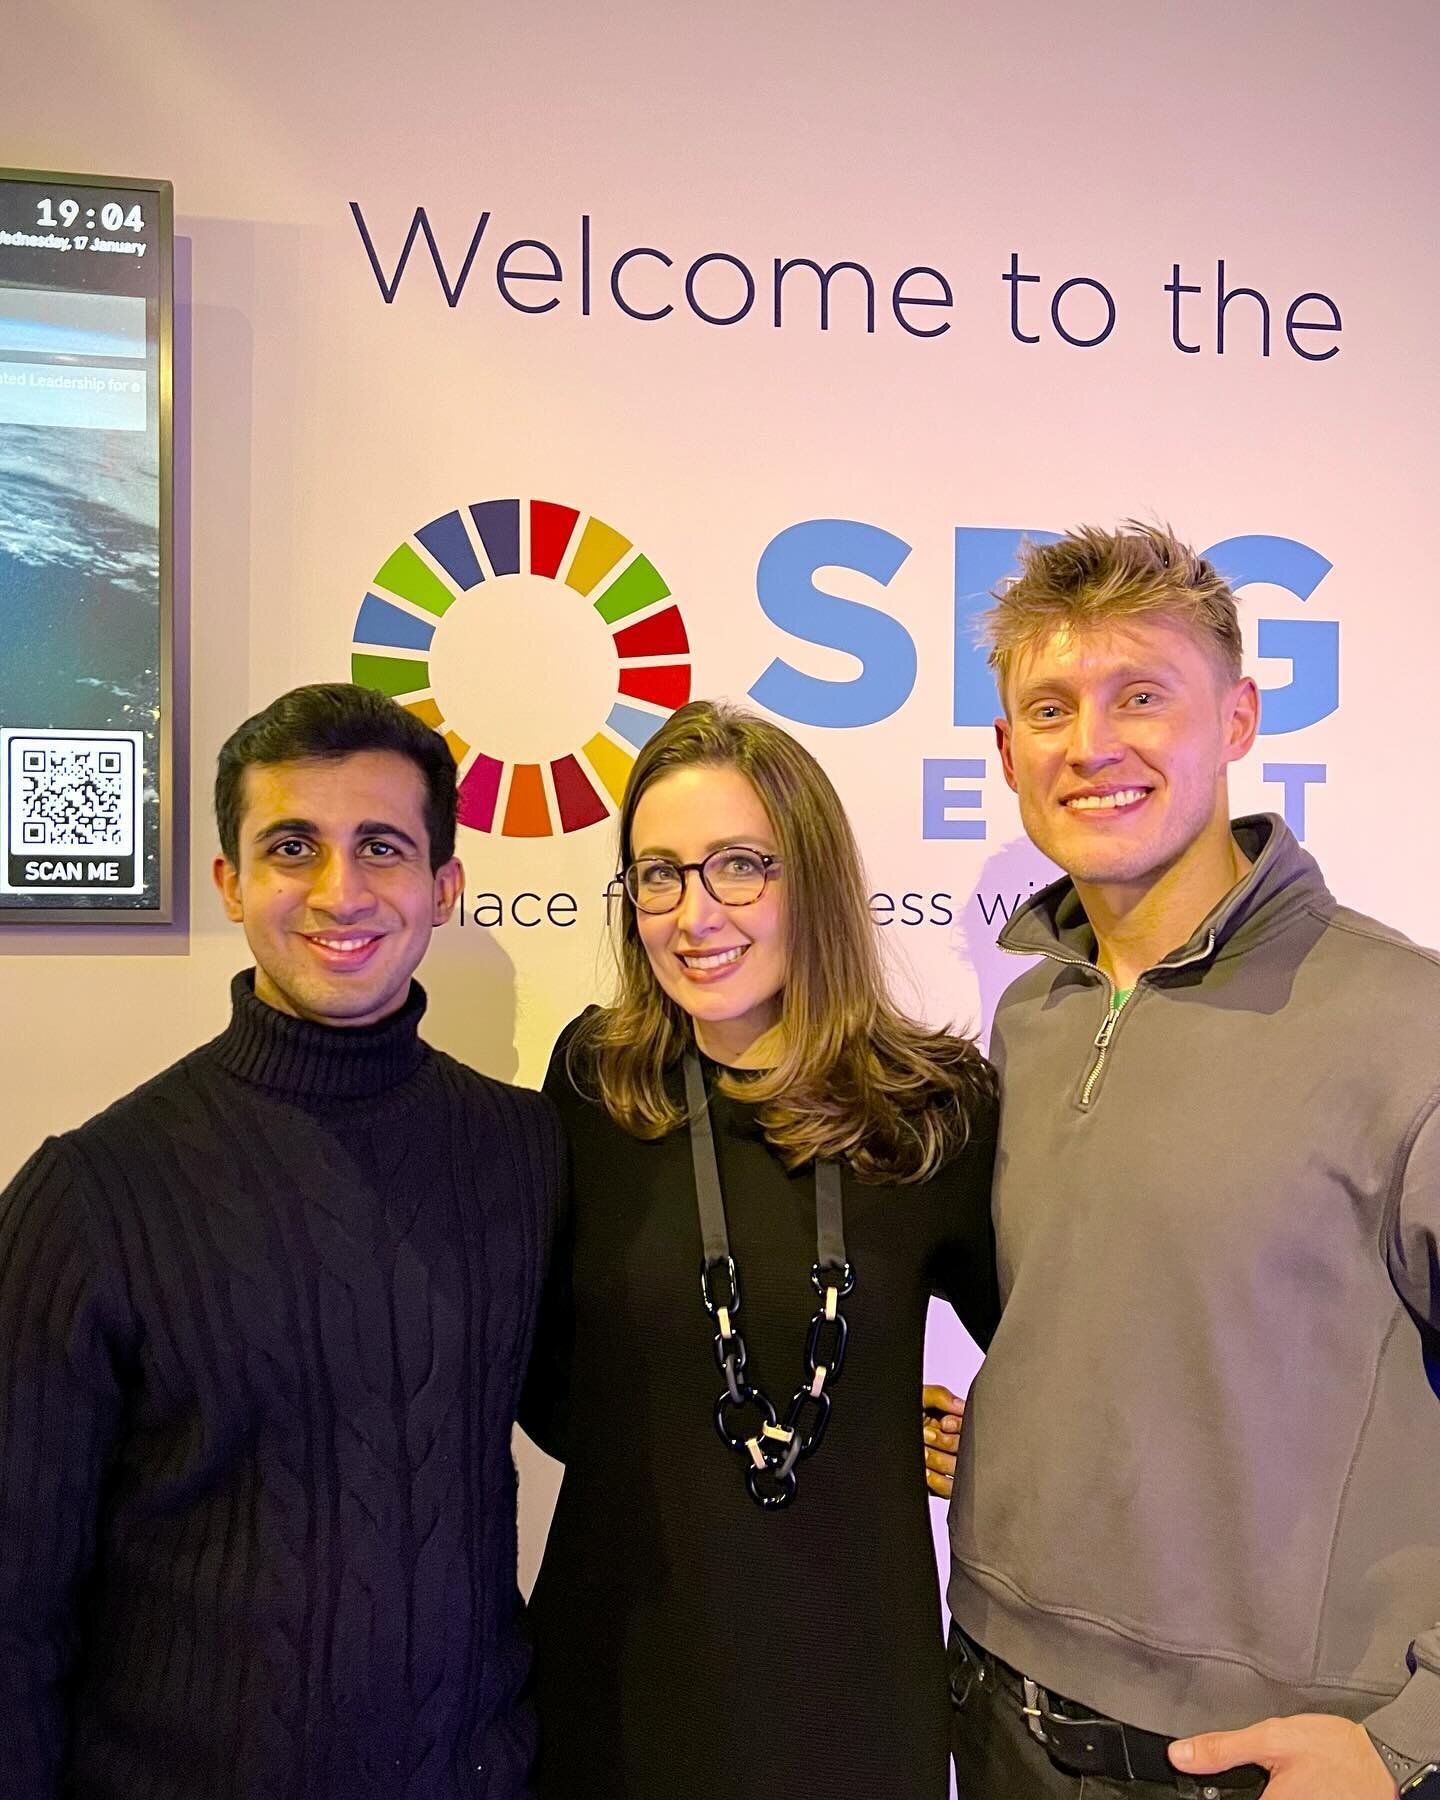 Day 3 at Davos was marked by our scholars meeting Nadja Skaljic, International Lawyer and WHT Board Member.

Amidst the chaos and events happening at the mountain, they were able to raise important questions such as how can we reach our sustainabilit